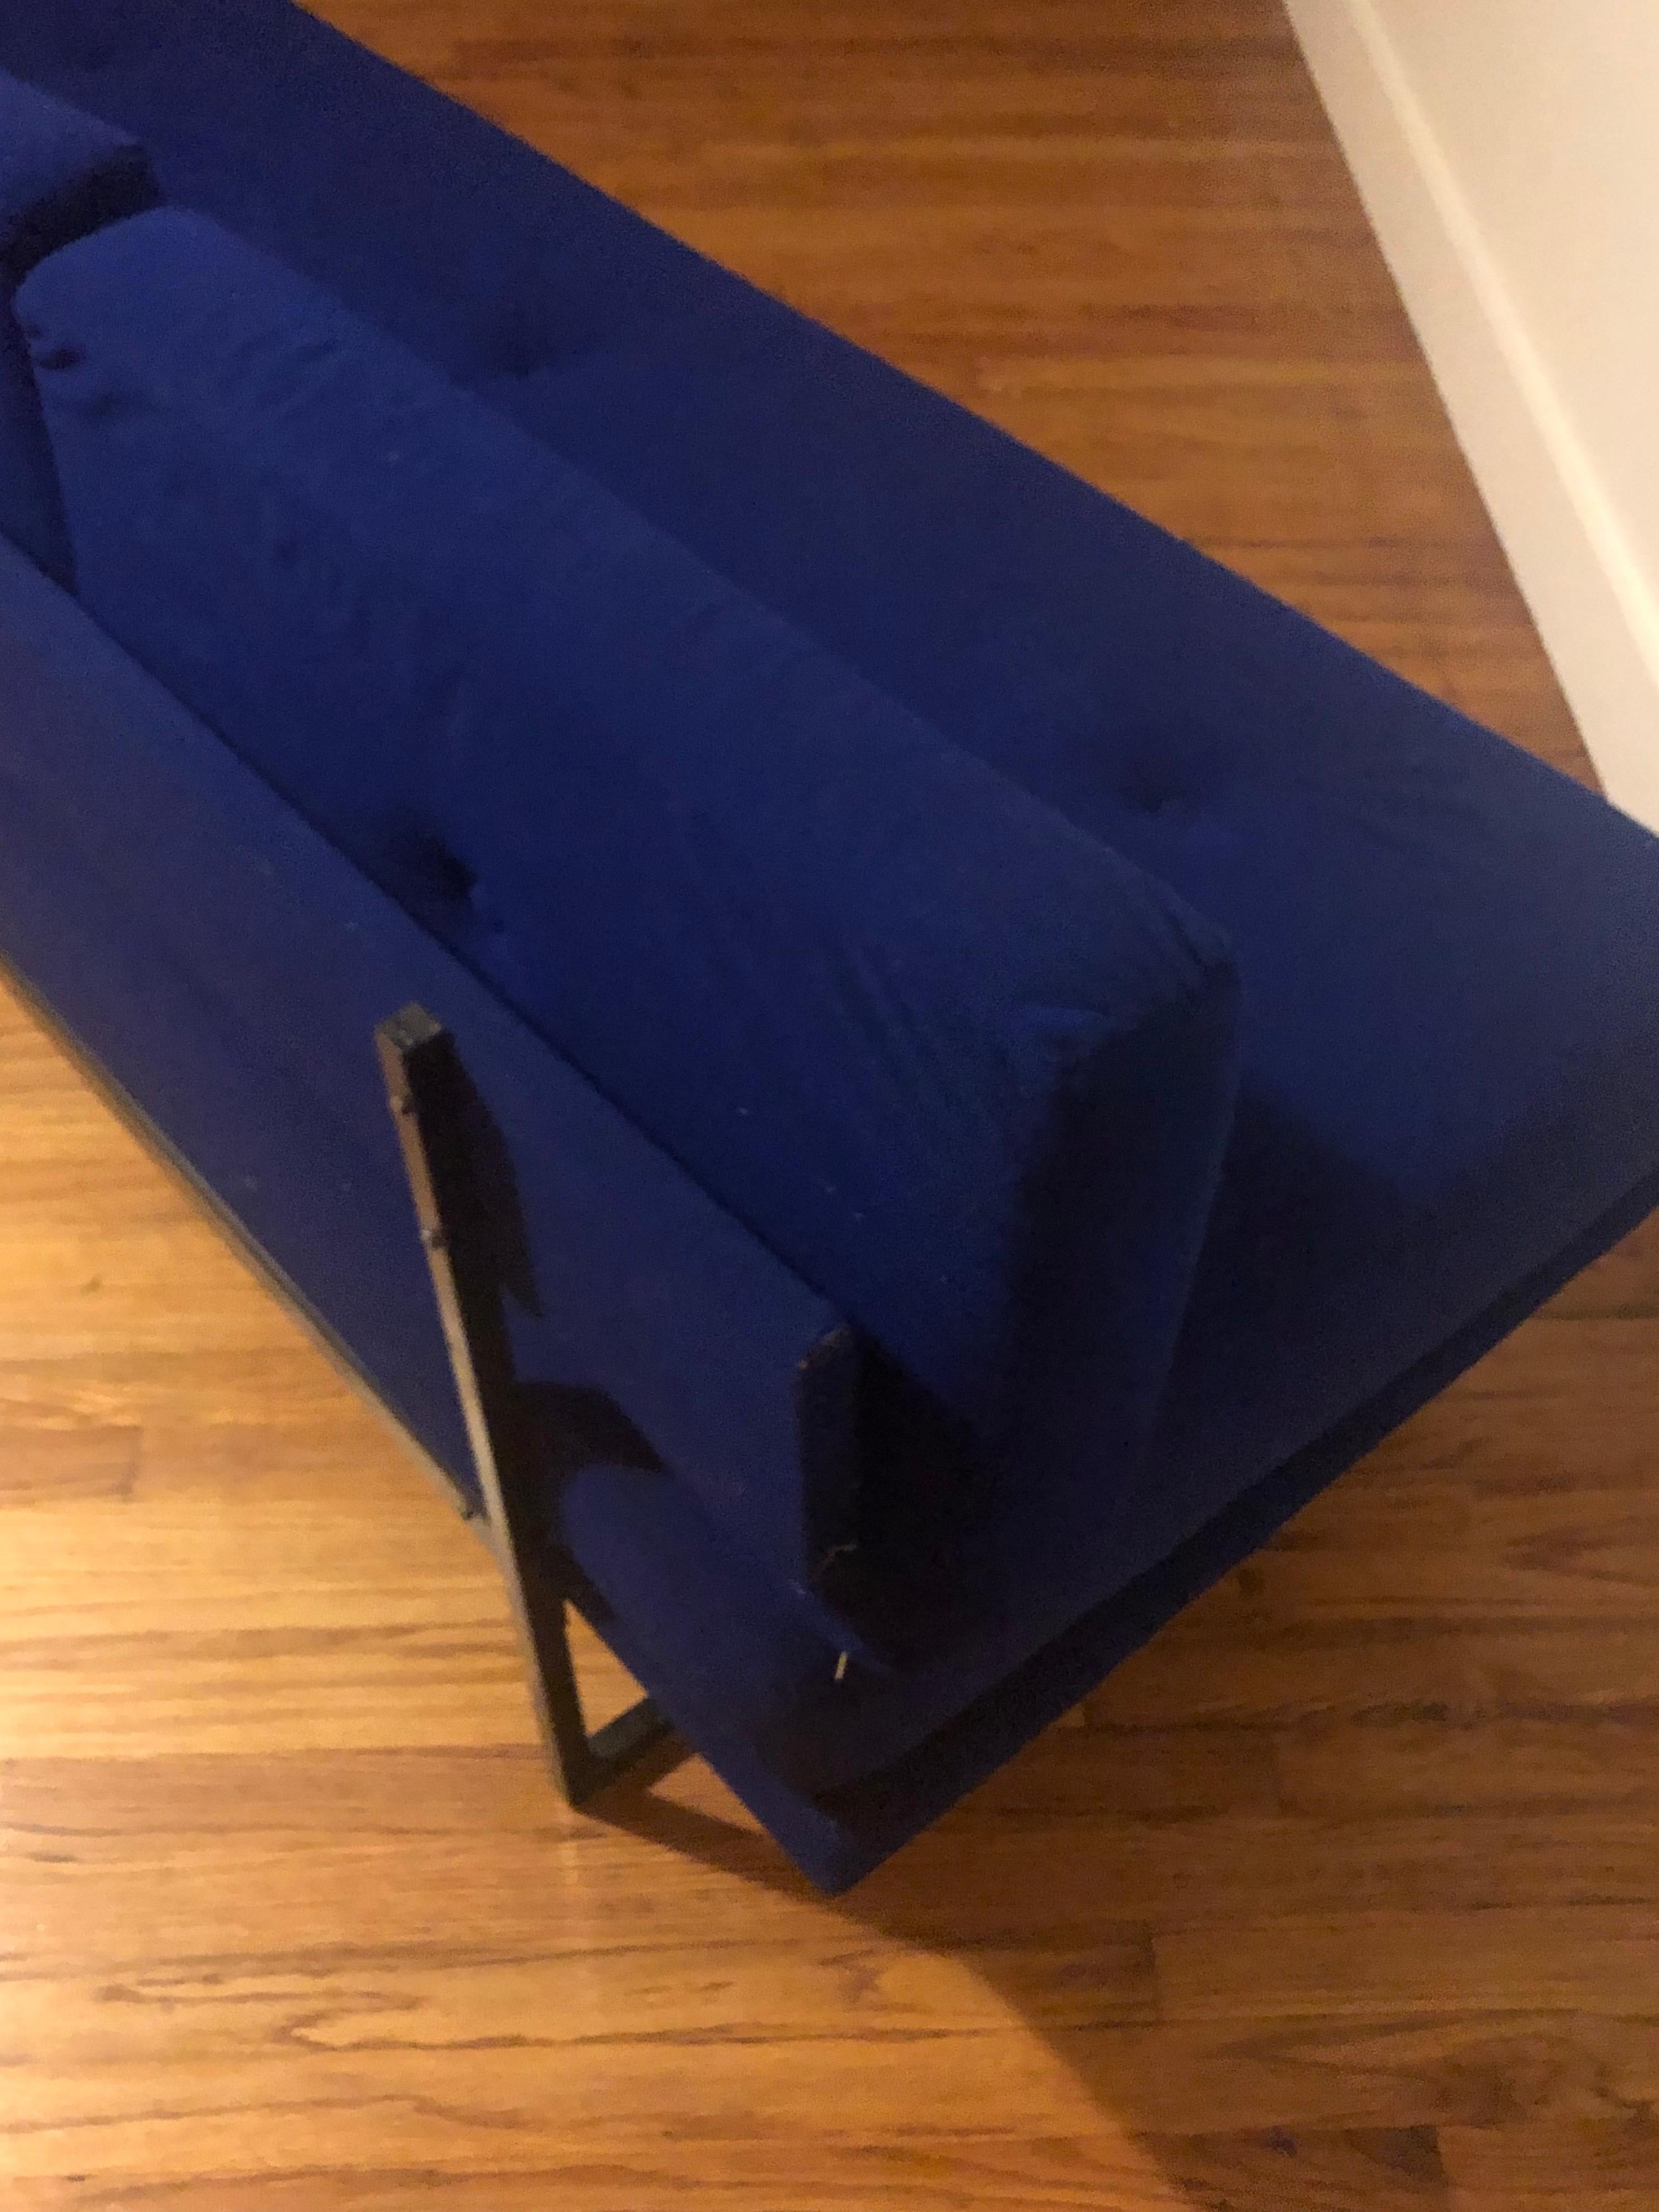 French Mid-Century Modern Sofa / Day Bed by A R P & Yves Klein Blue Style Fabric For Sale 4